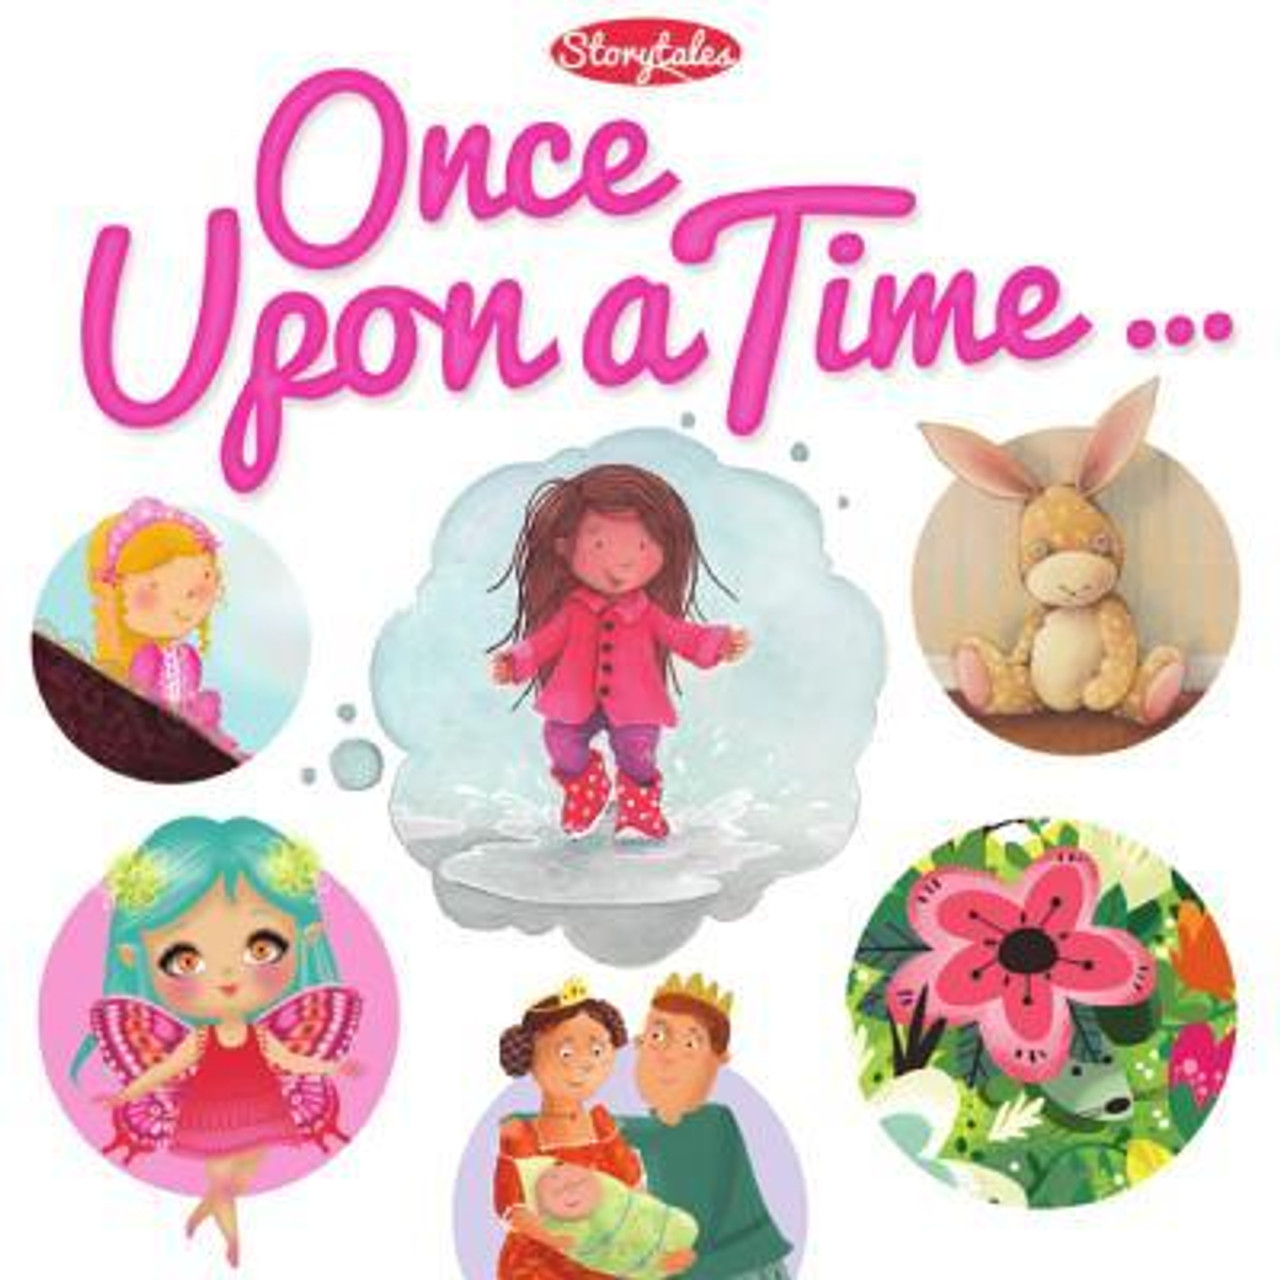 Once Upon a Time (Children's Coffee Table book)